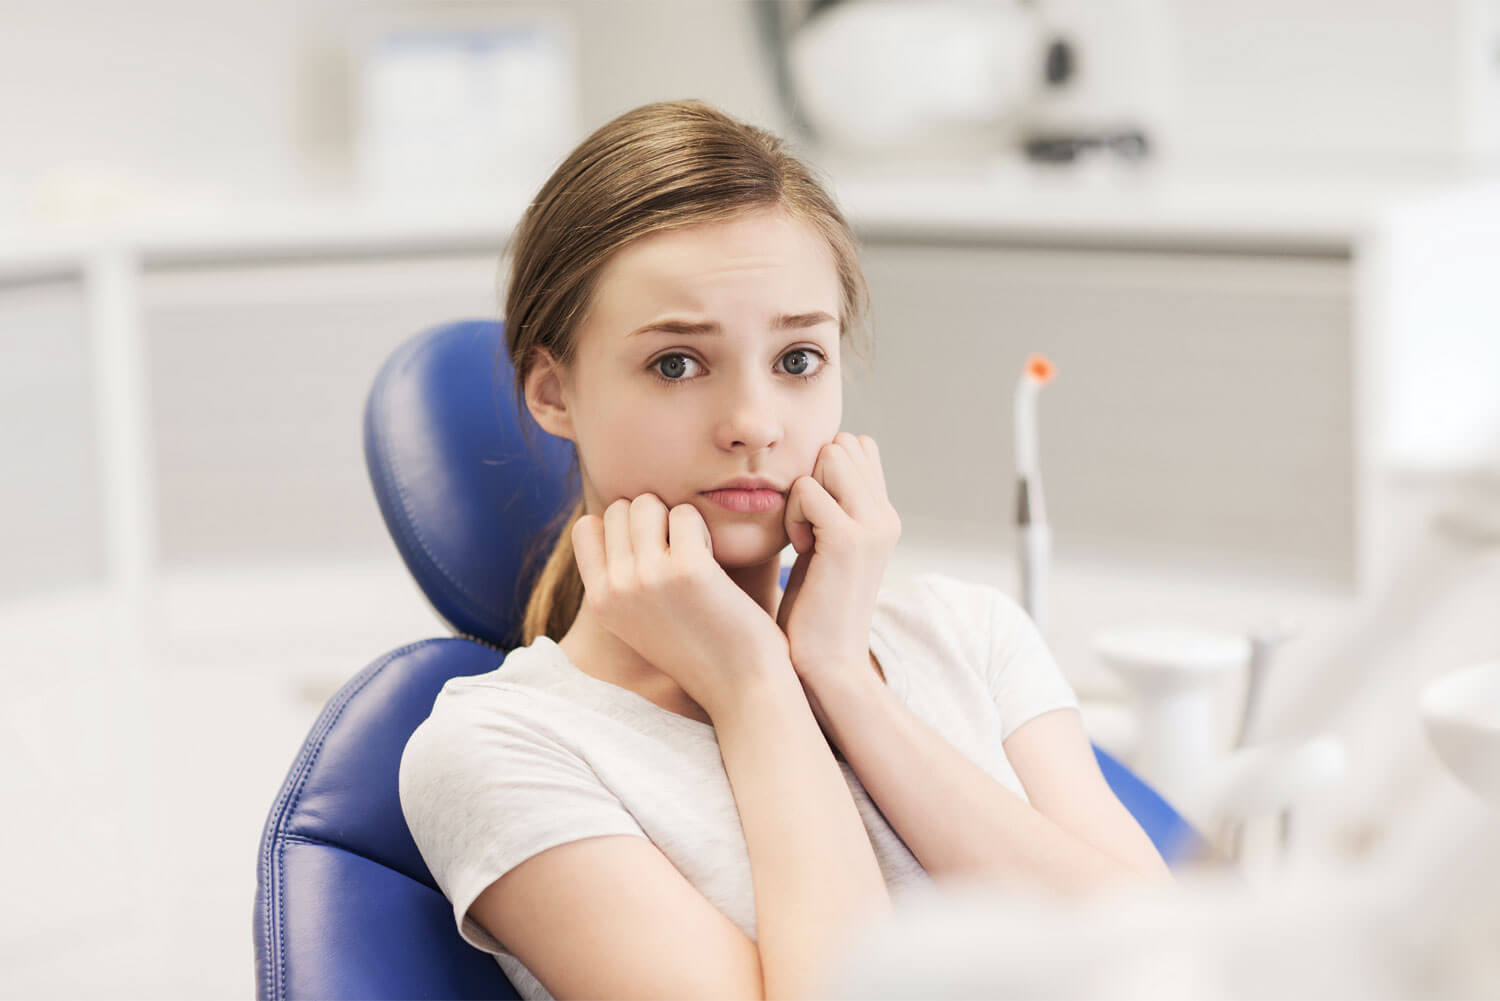 Child in a dental chair with anxiety being at the dentist